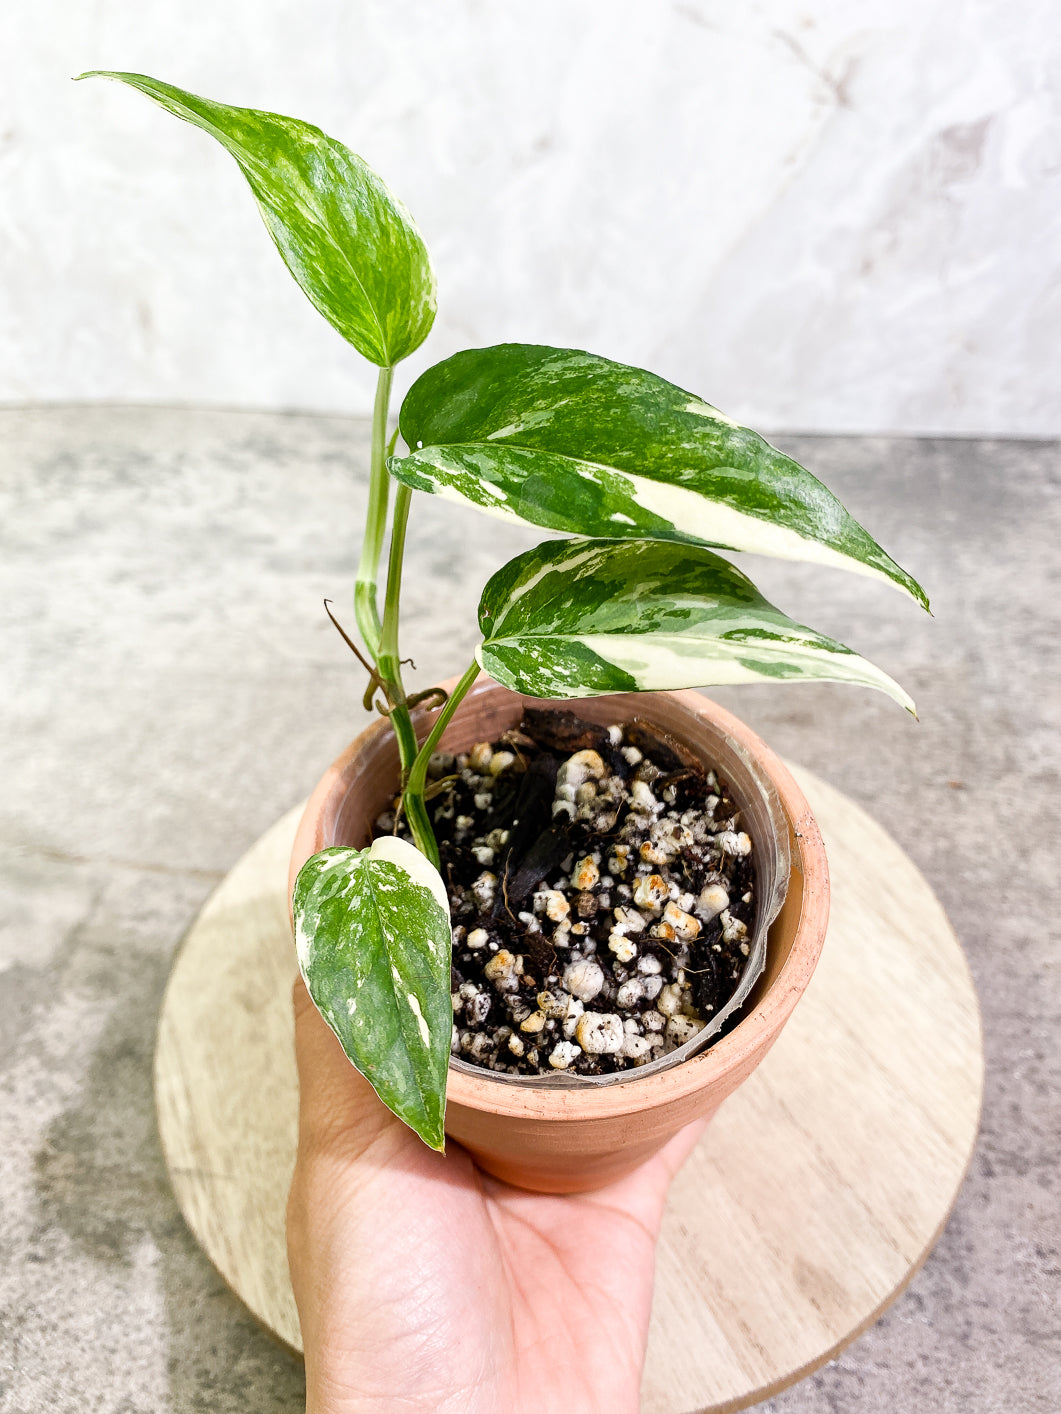 Epipremnum Pinnatum Variegated 4 leaves 1 sprout fully rooted